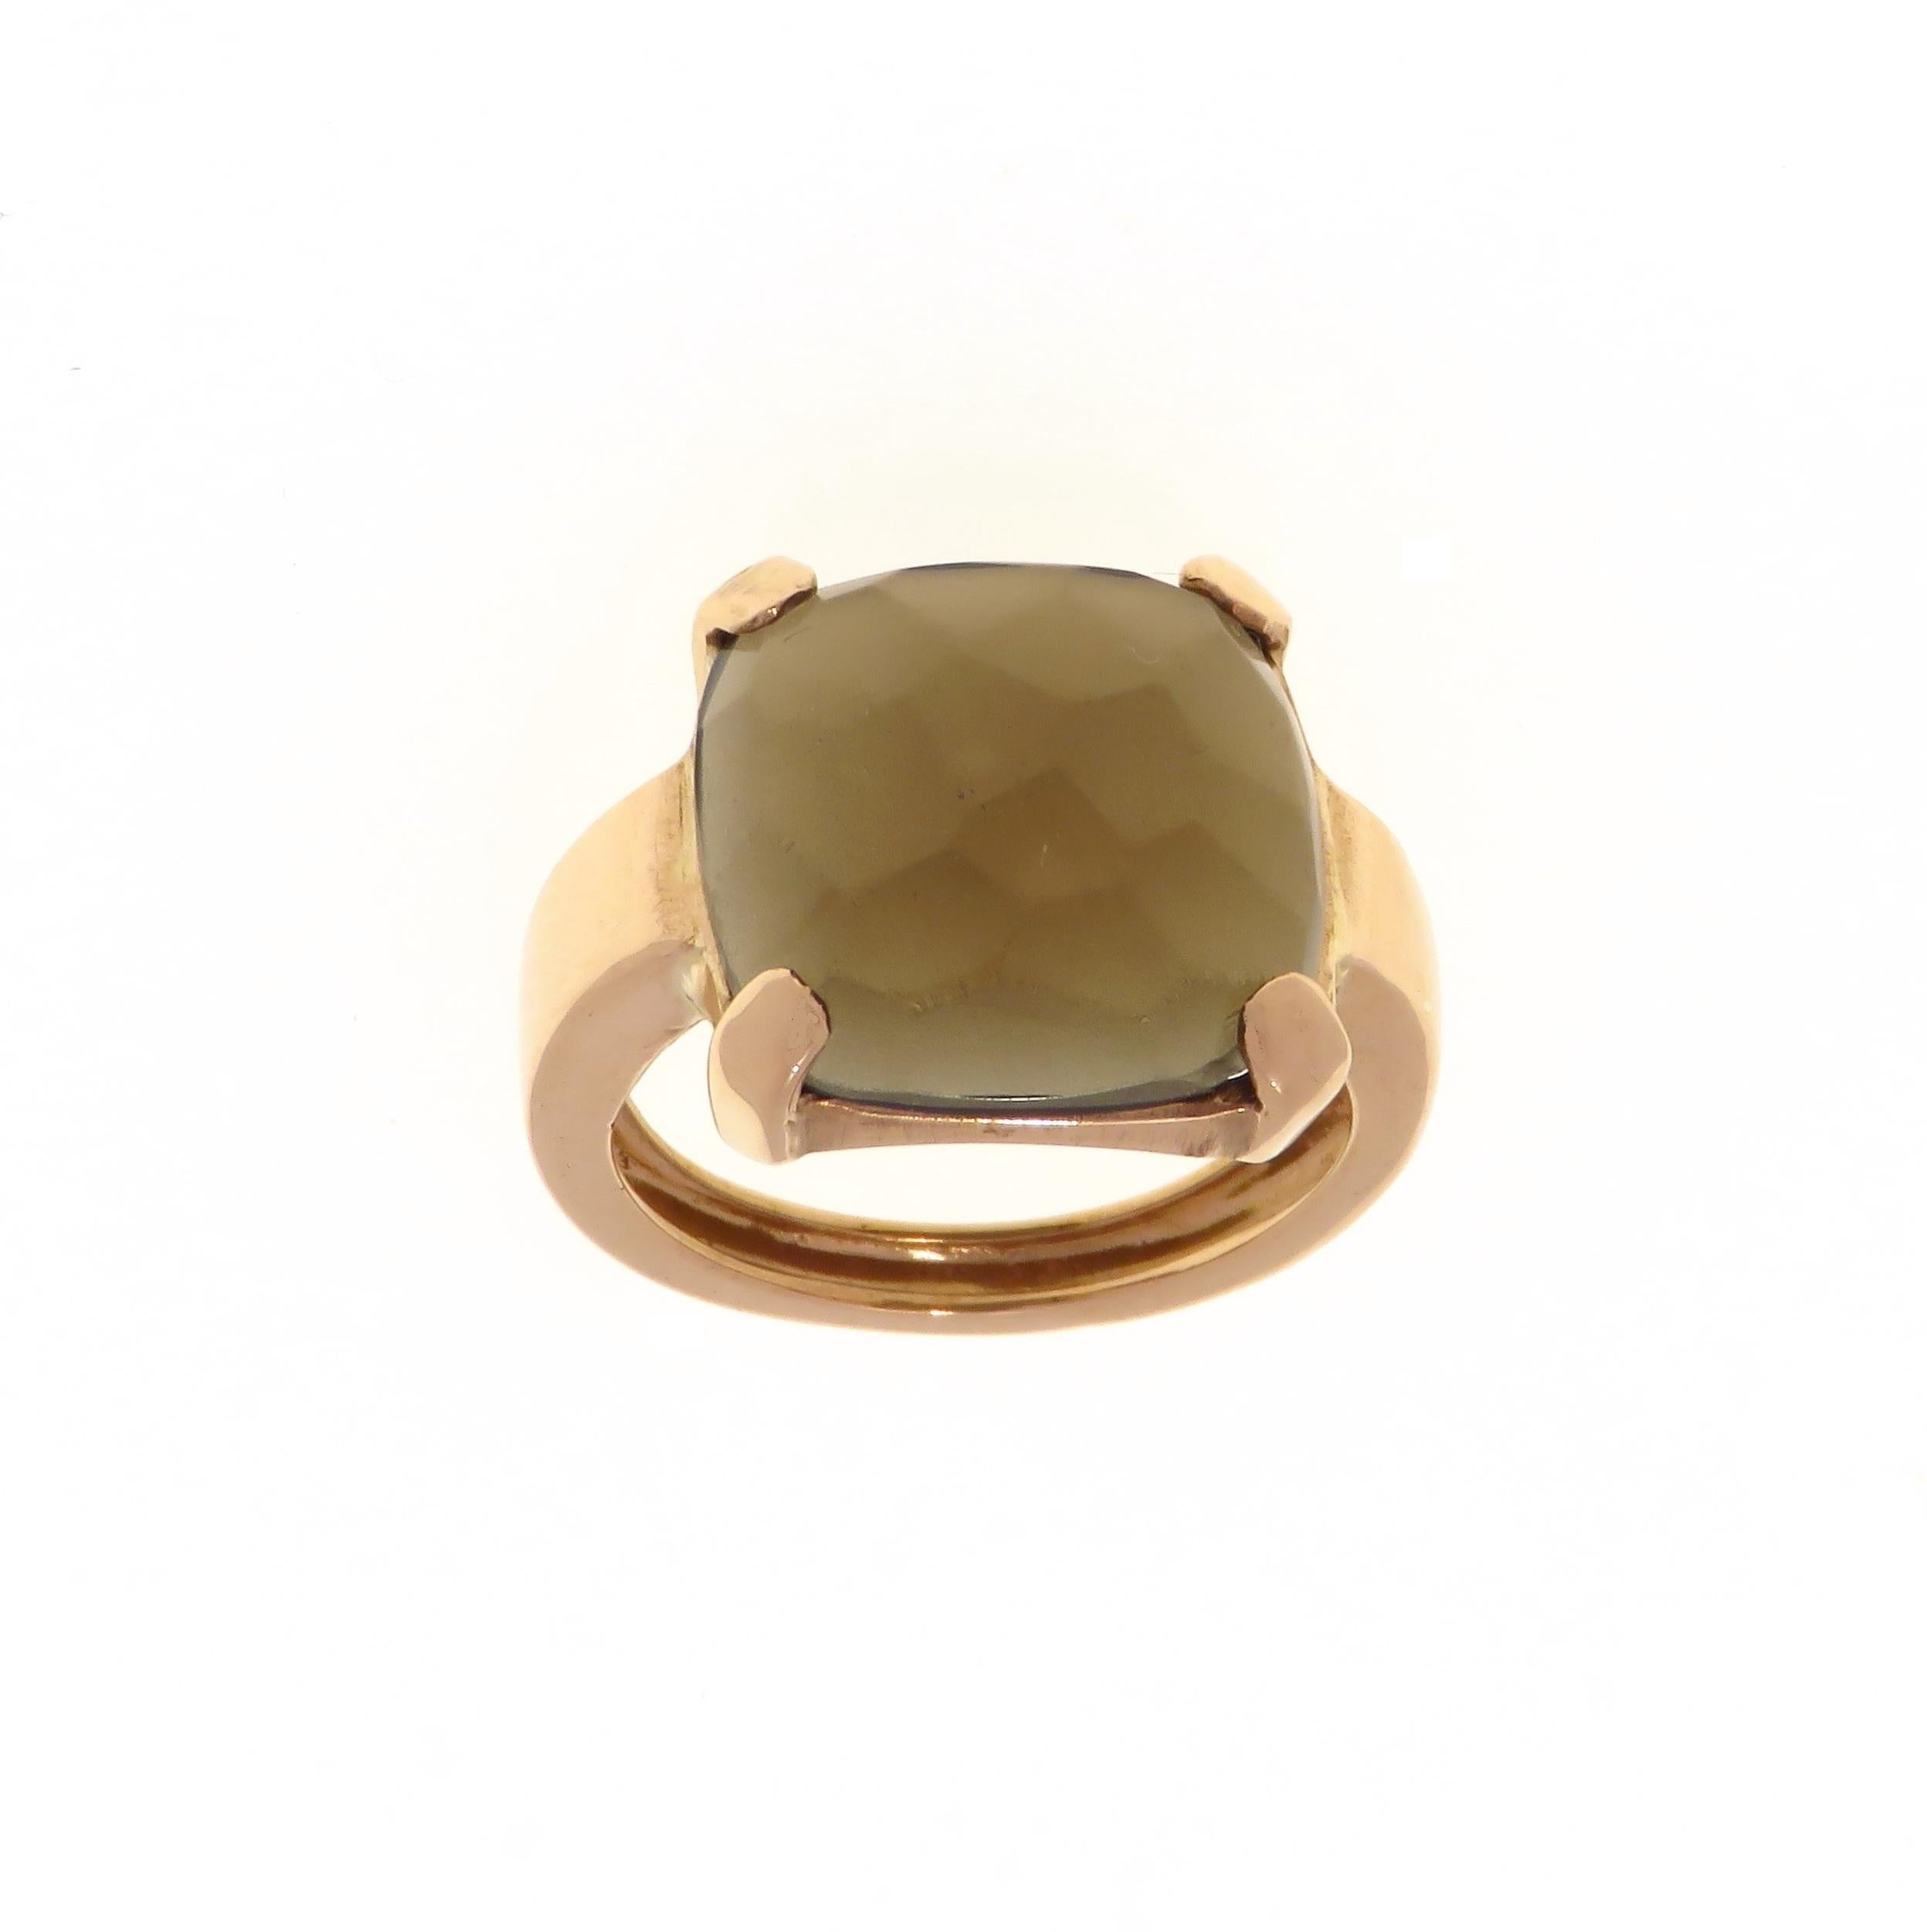 Contemporary 9 karat rose gold ring with smoke brown citrine. The cabochon faceted cut makes particularly attractive this natural citrine. The size of the gemstone is 14x14 mm / 0.551x0.551 inches. US finger size is 6, French size 52, Italian size